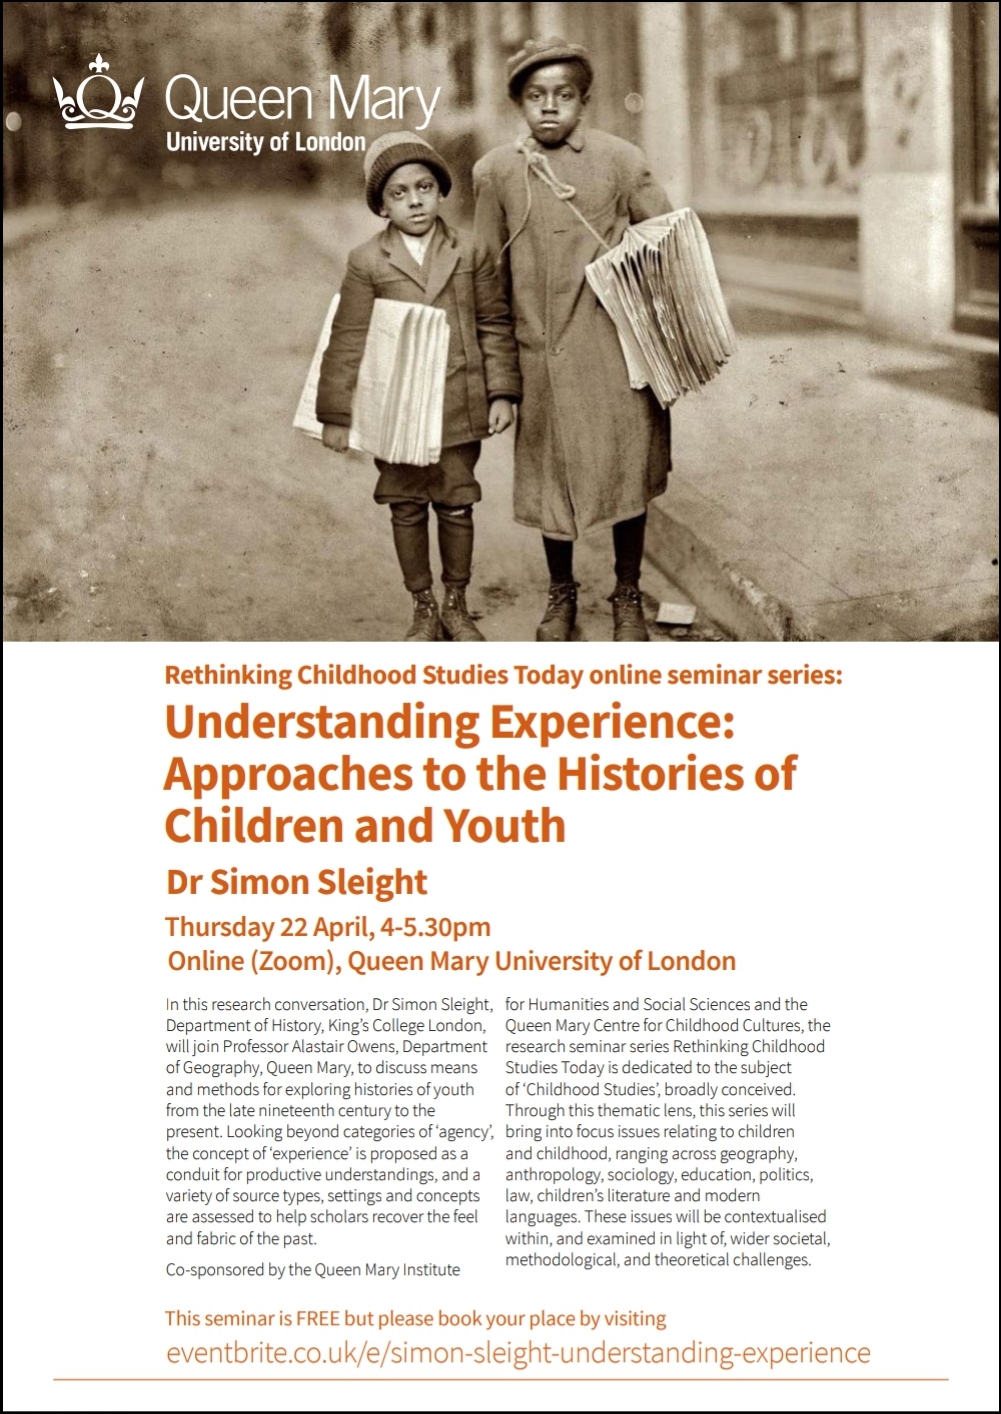 Understanding Experience: Approaches to the Histories of Children and Youth
Research conversation with Dr Simon Sleight (KCL)
Part 1 of the Seminar Series Rethinking Childhood Studies Today (Centre for Childhood Cultures/ IHSS)